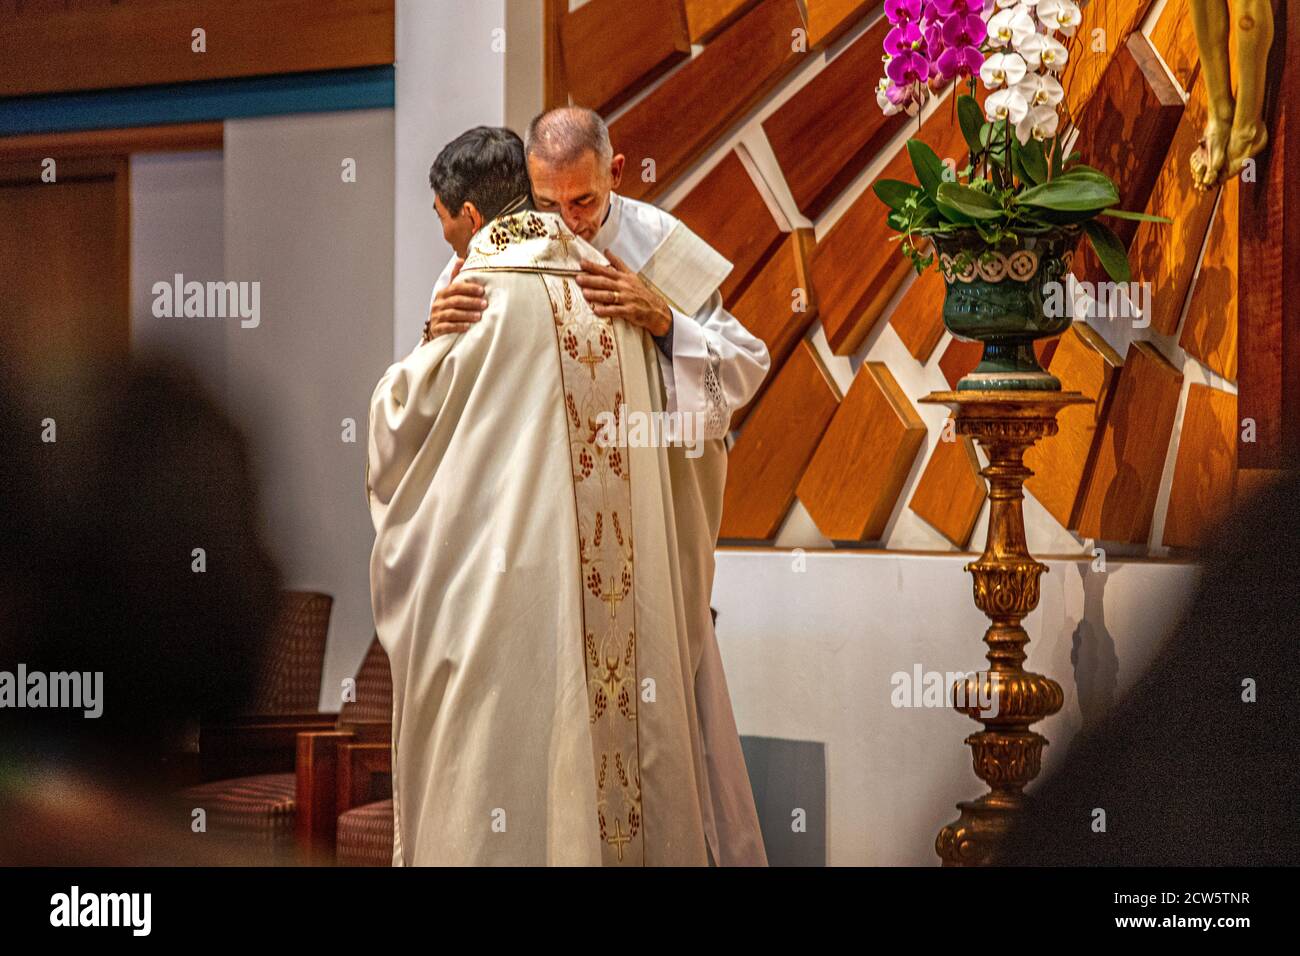 Wearing ceremonial robes, a deacon embraces an Asian American priest conducting mass at the altar of a Southern California Catholic church. Stock Photo